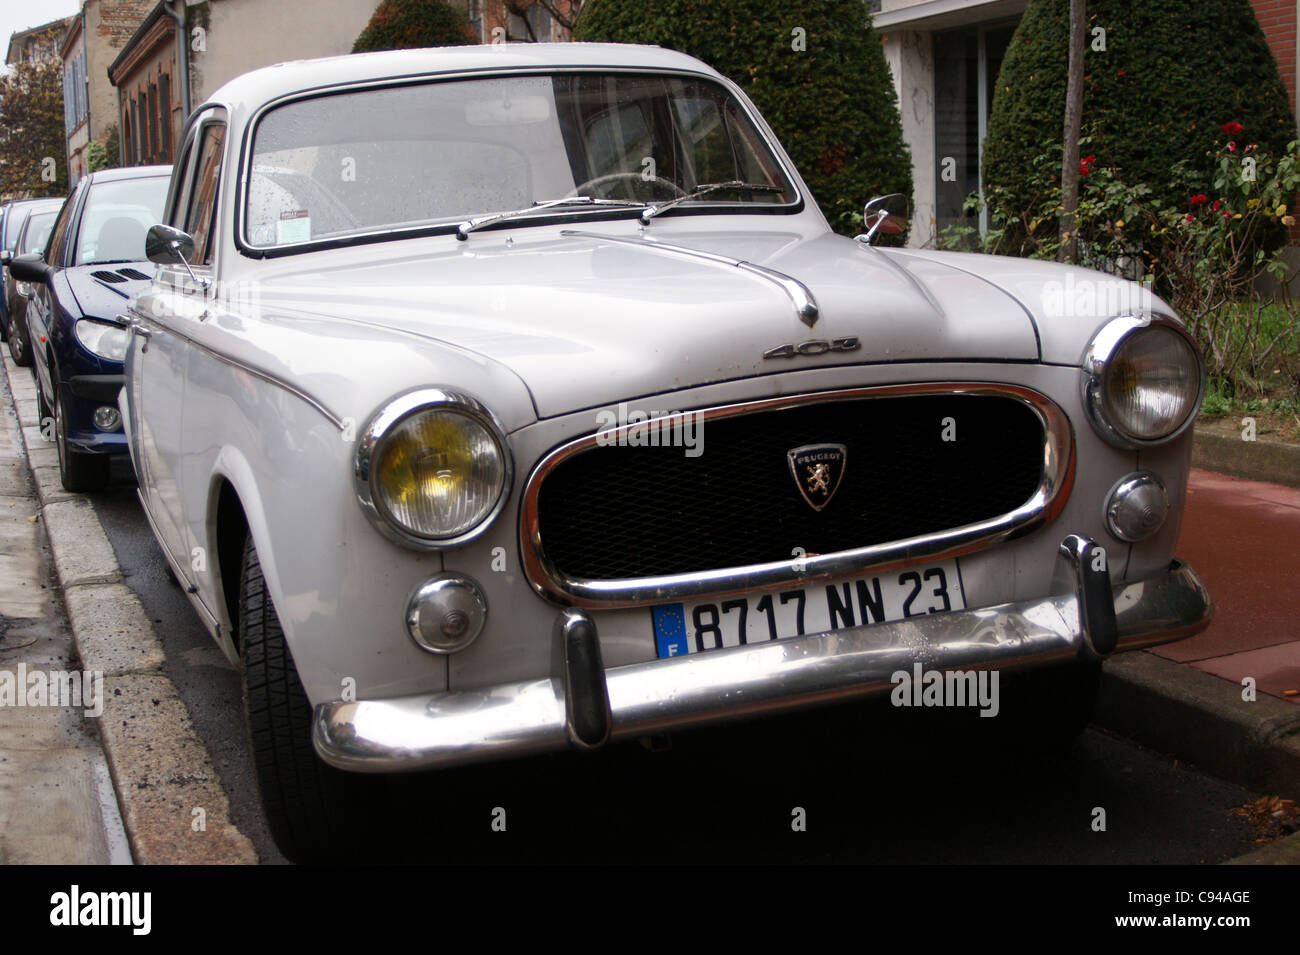 Peugeot model 403 car, type driven by TV detective Columbo, parked on a street in Toulouse, Haute-Garonne, France Stock Photo